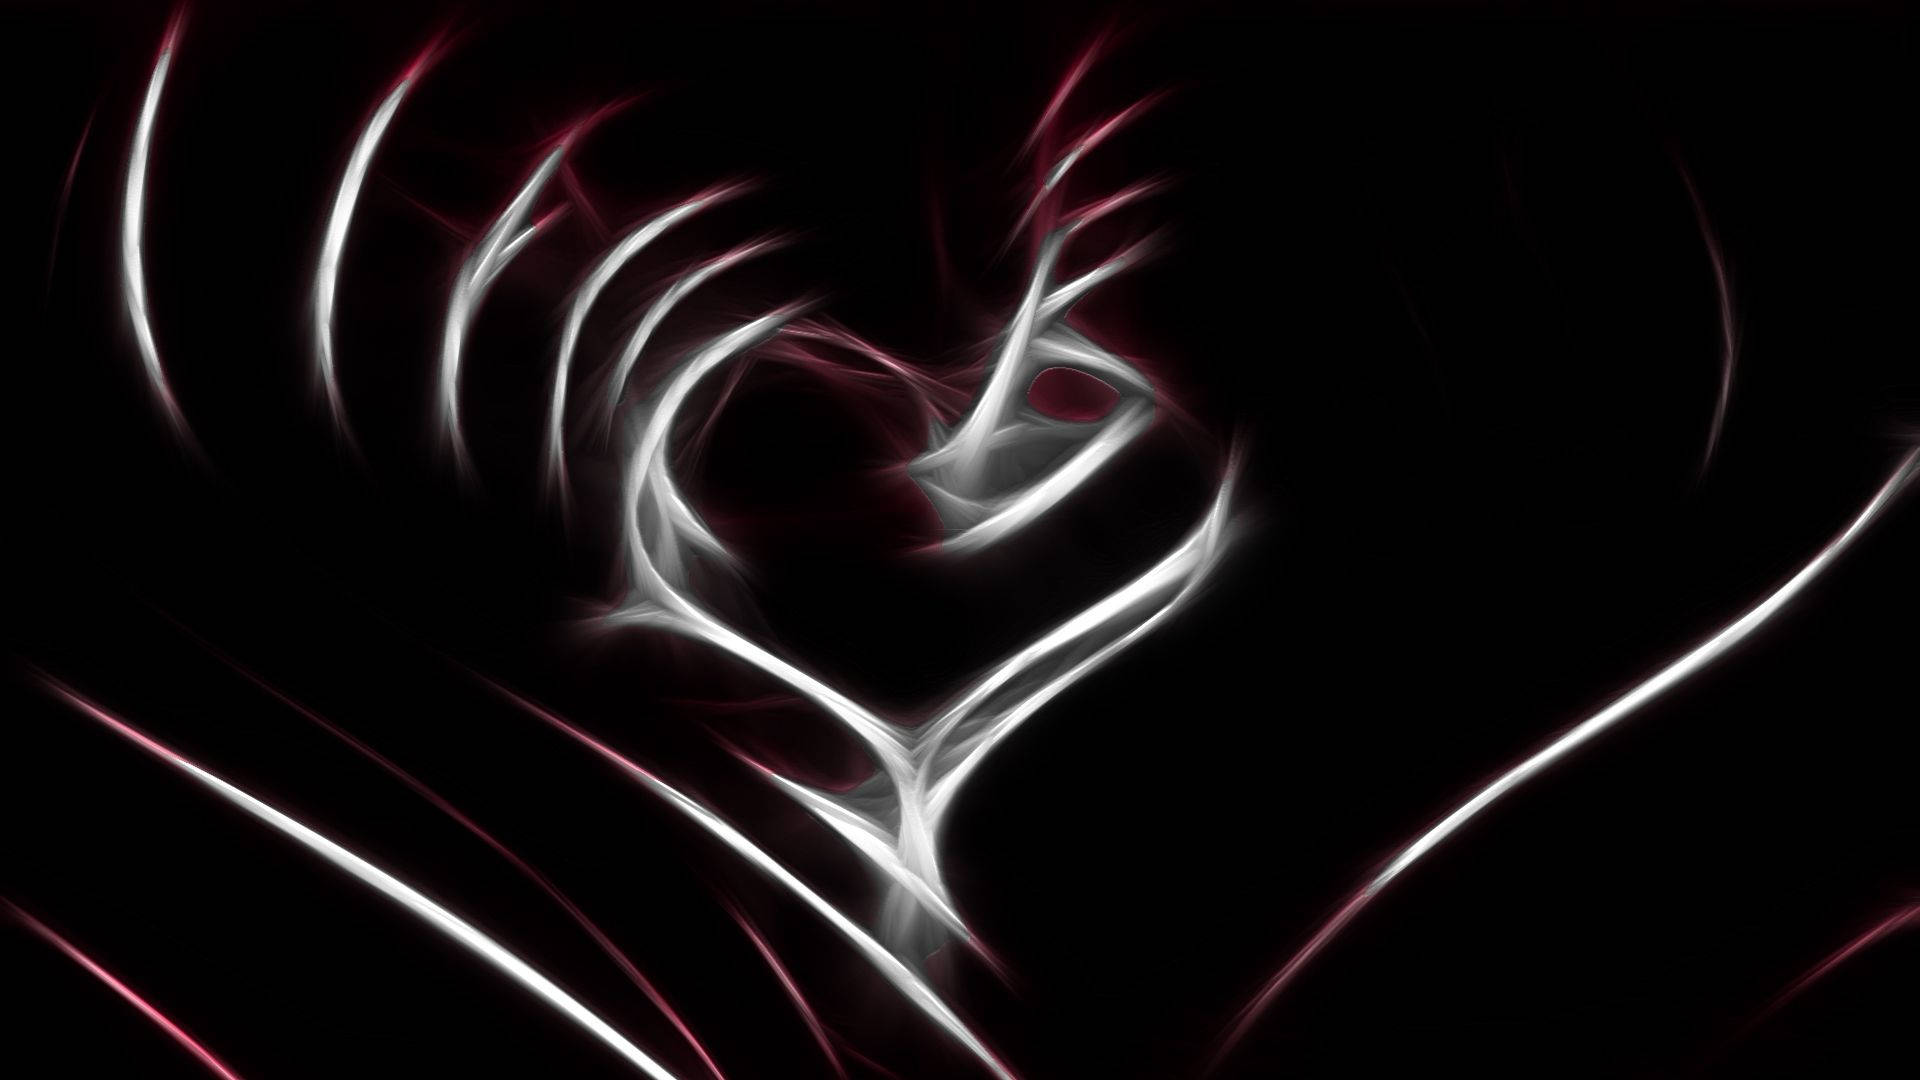 Abstract Black Heart With Stylistic White Lines